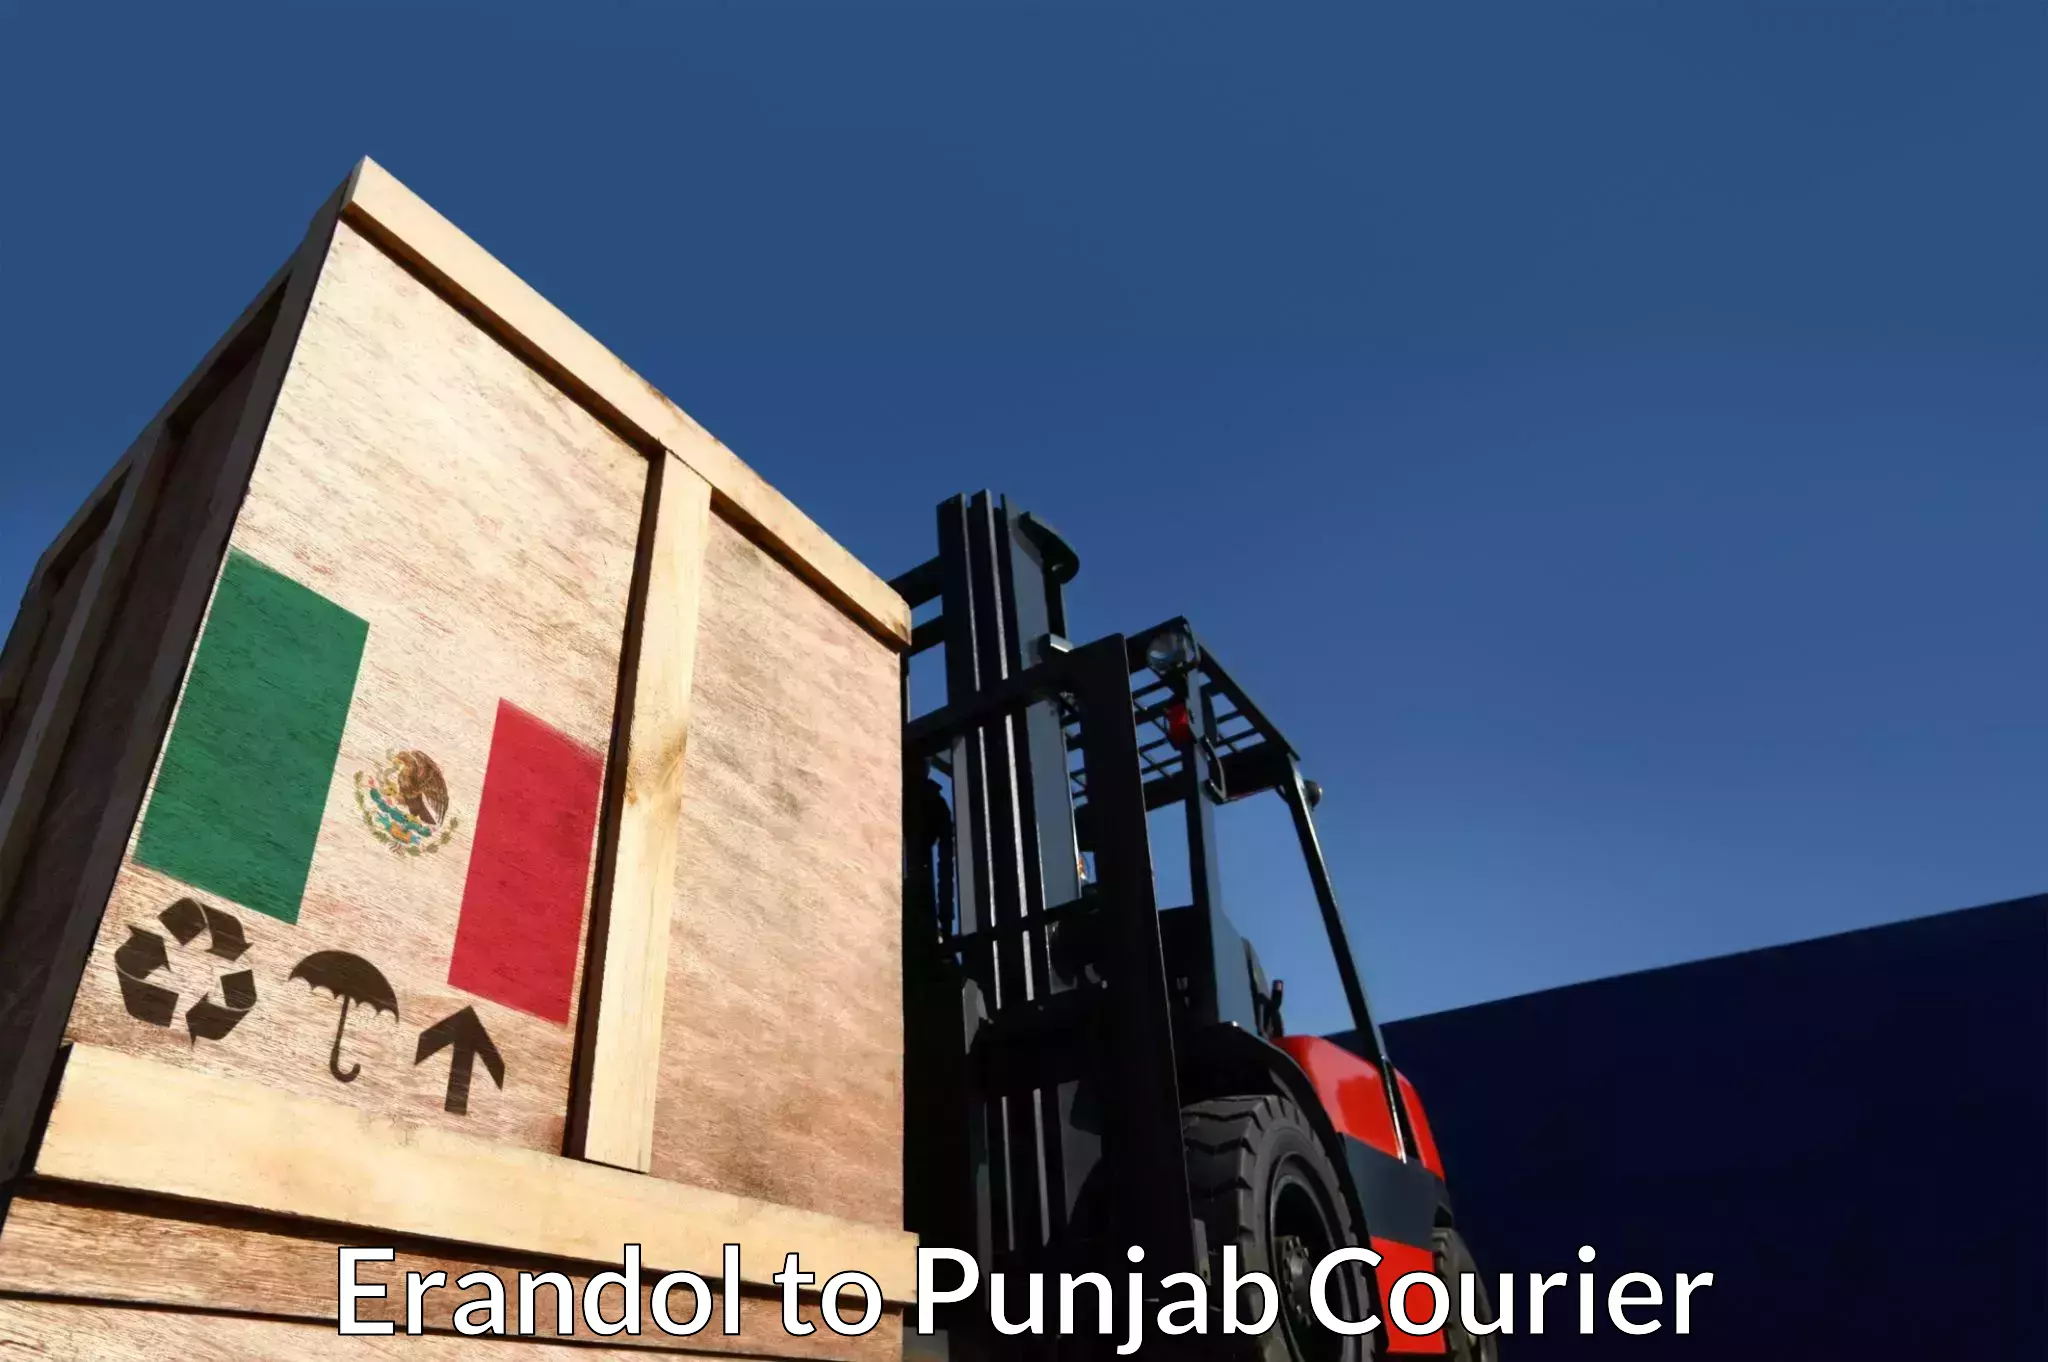 Customizable delivery plans in Erandol to Punjab